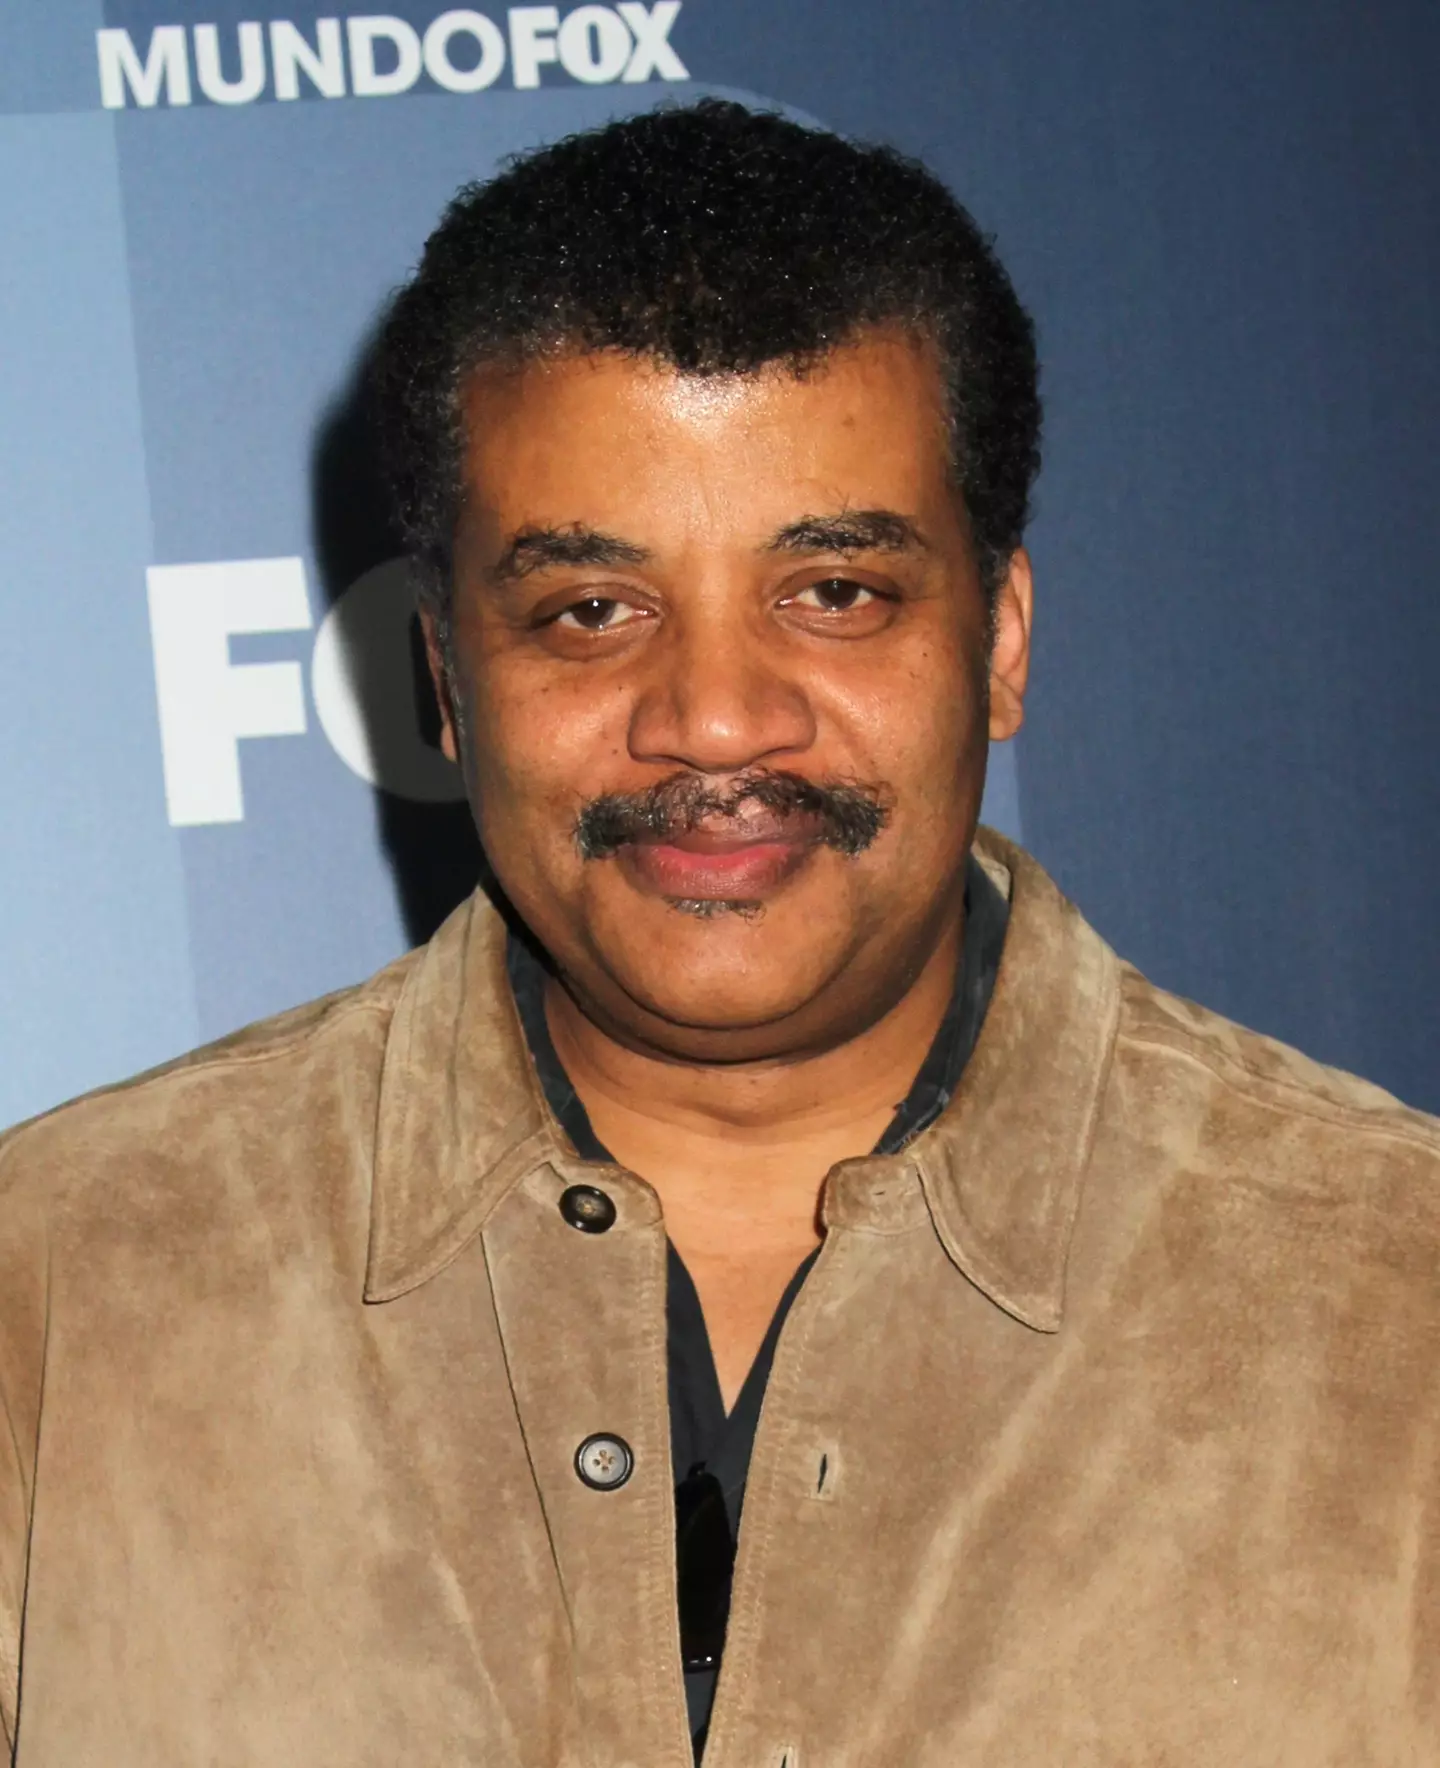 Neil deGrasse Tyson is one of those who was critical of B.o.B's views.